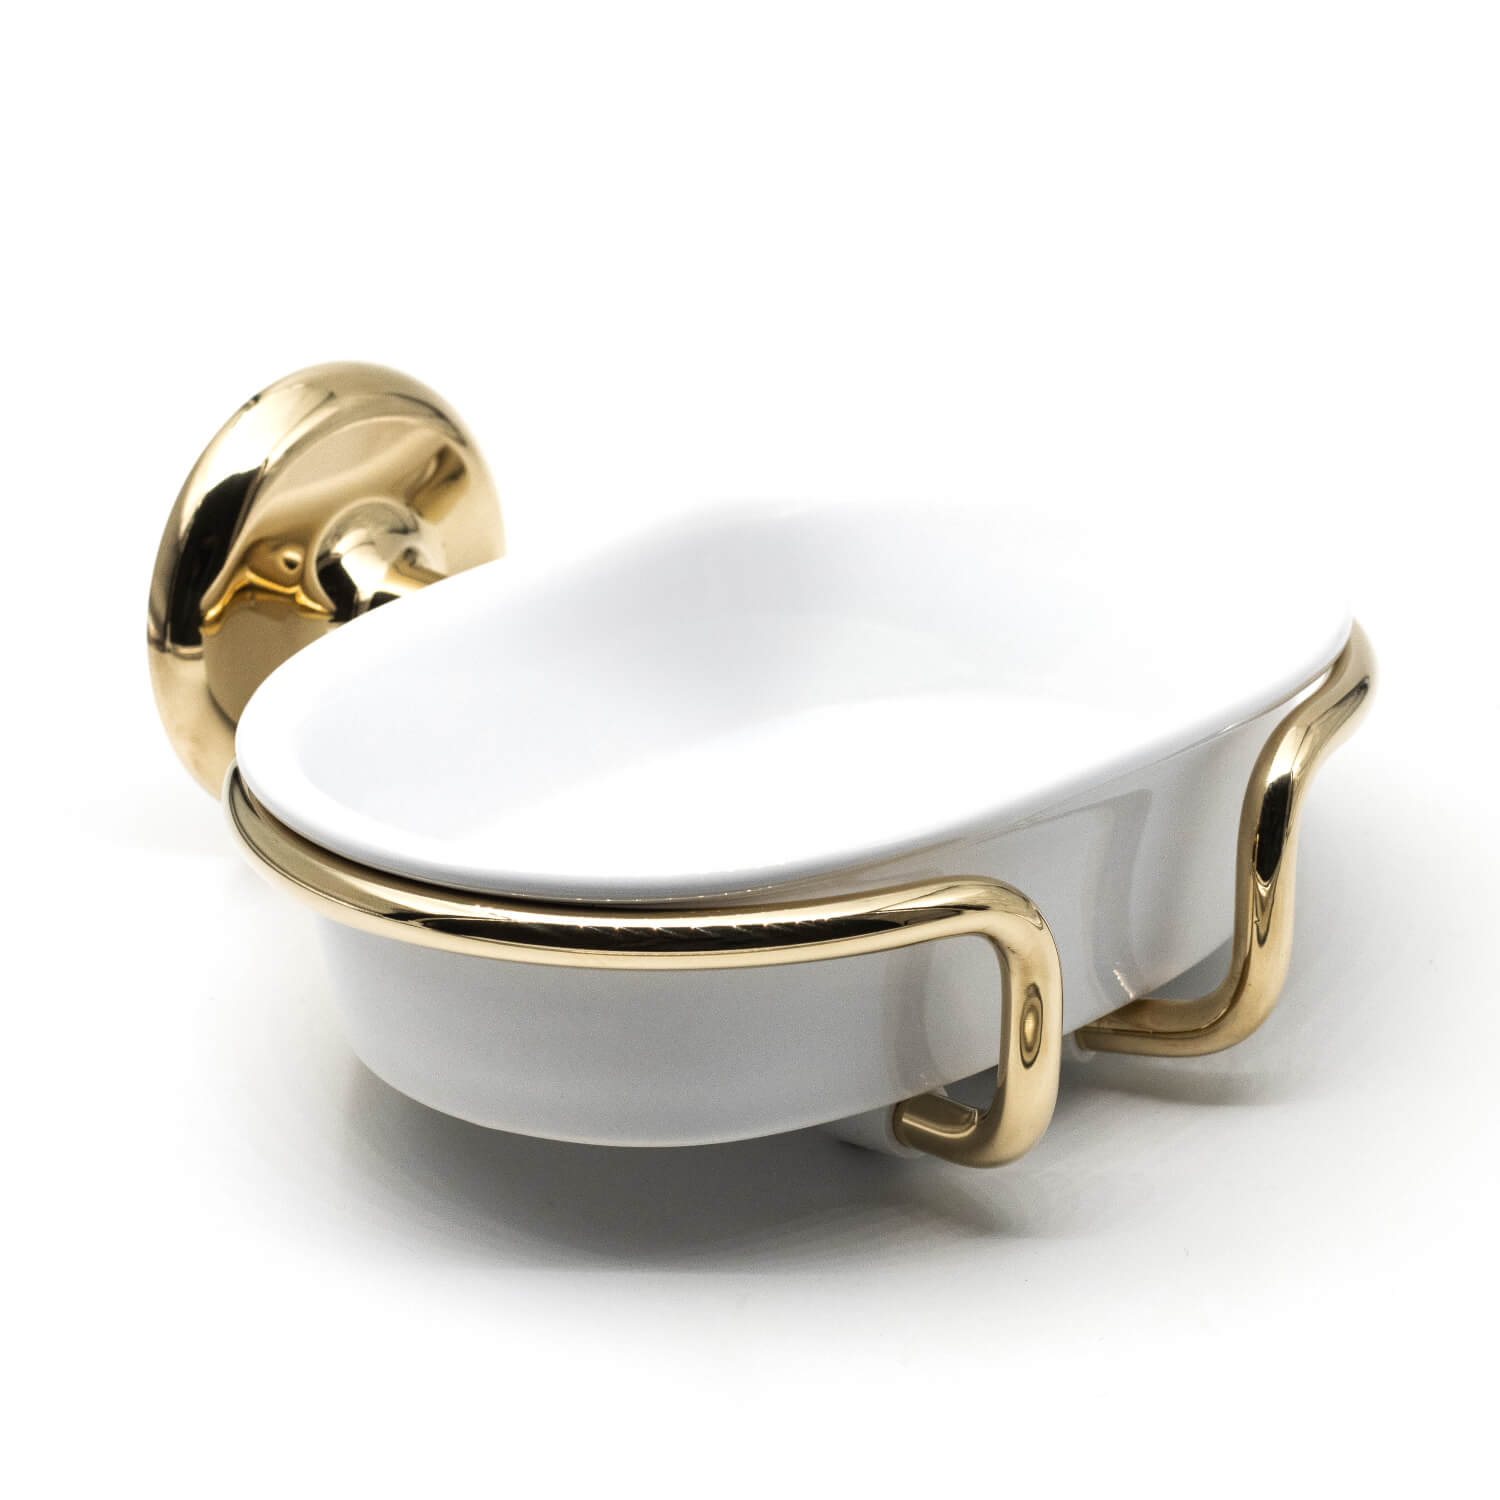 Wall fitting with One Screw Classic Solid Brass Soap Dish and Holder 